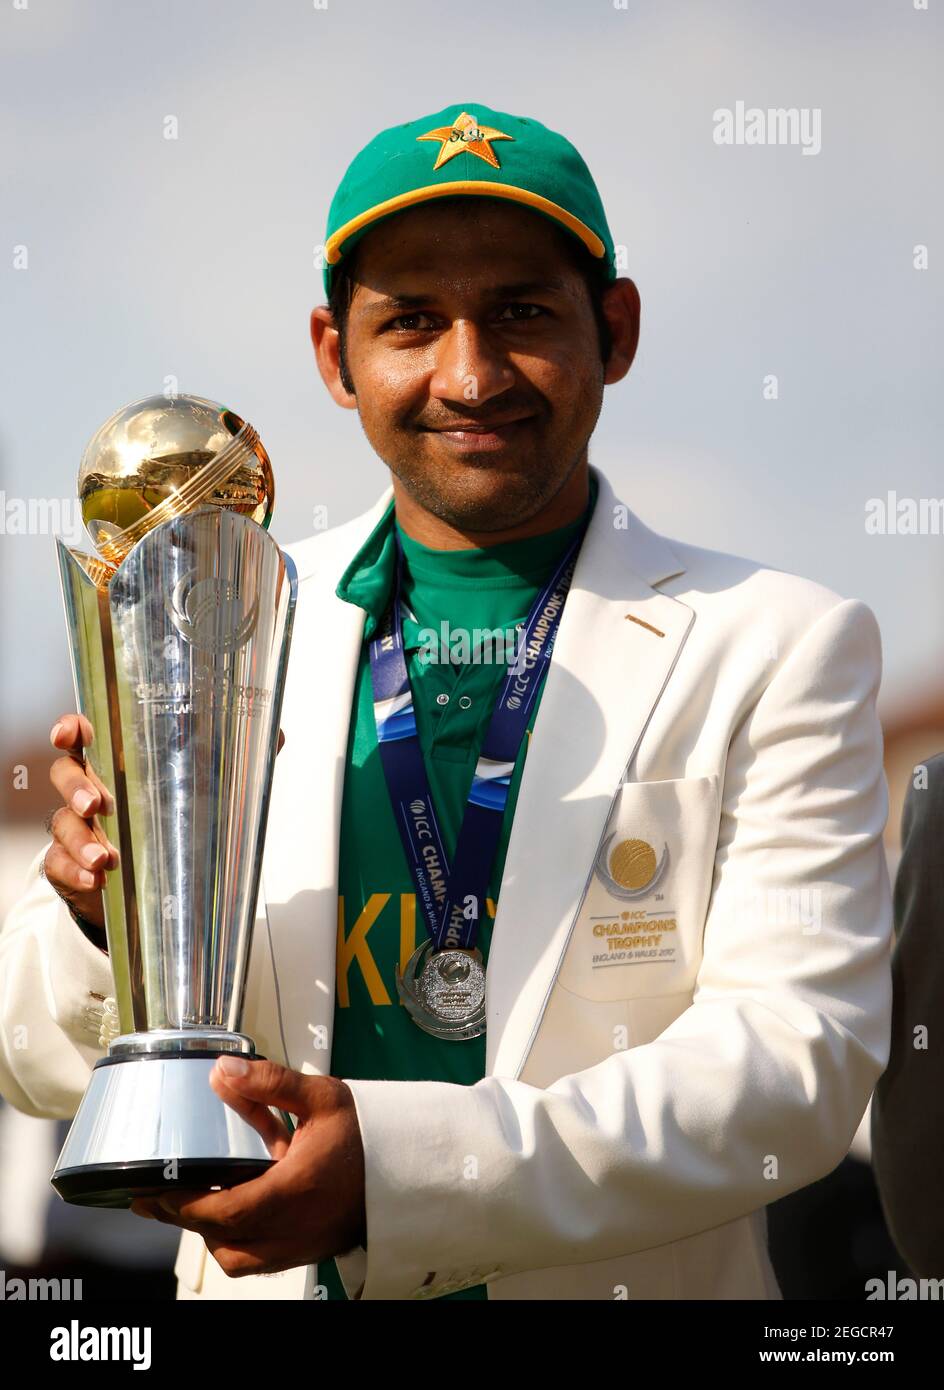 Britain Cricket - Pakistan v India - 2017 ICC Champions Trophy Final - The  Oval - June 18, 2017 Pakistan's Sarfraz Ahmed poses as he celebrates  winning the ICC Champions Trophy Action